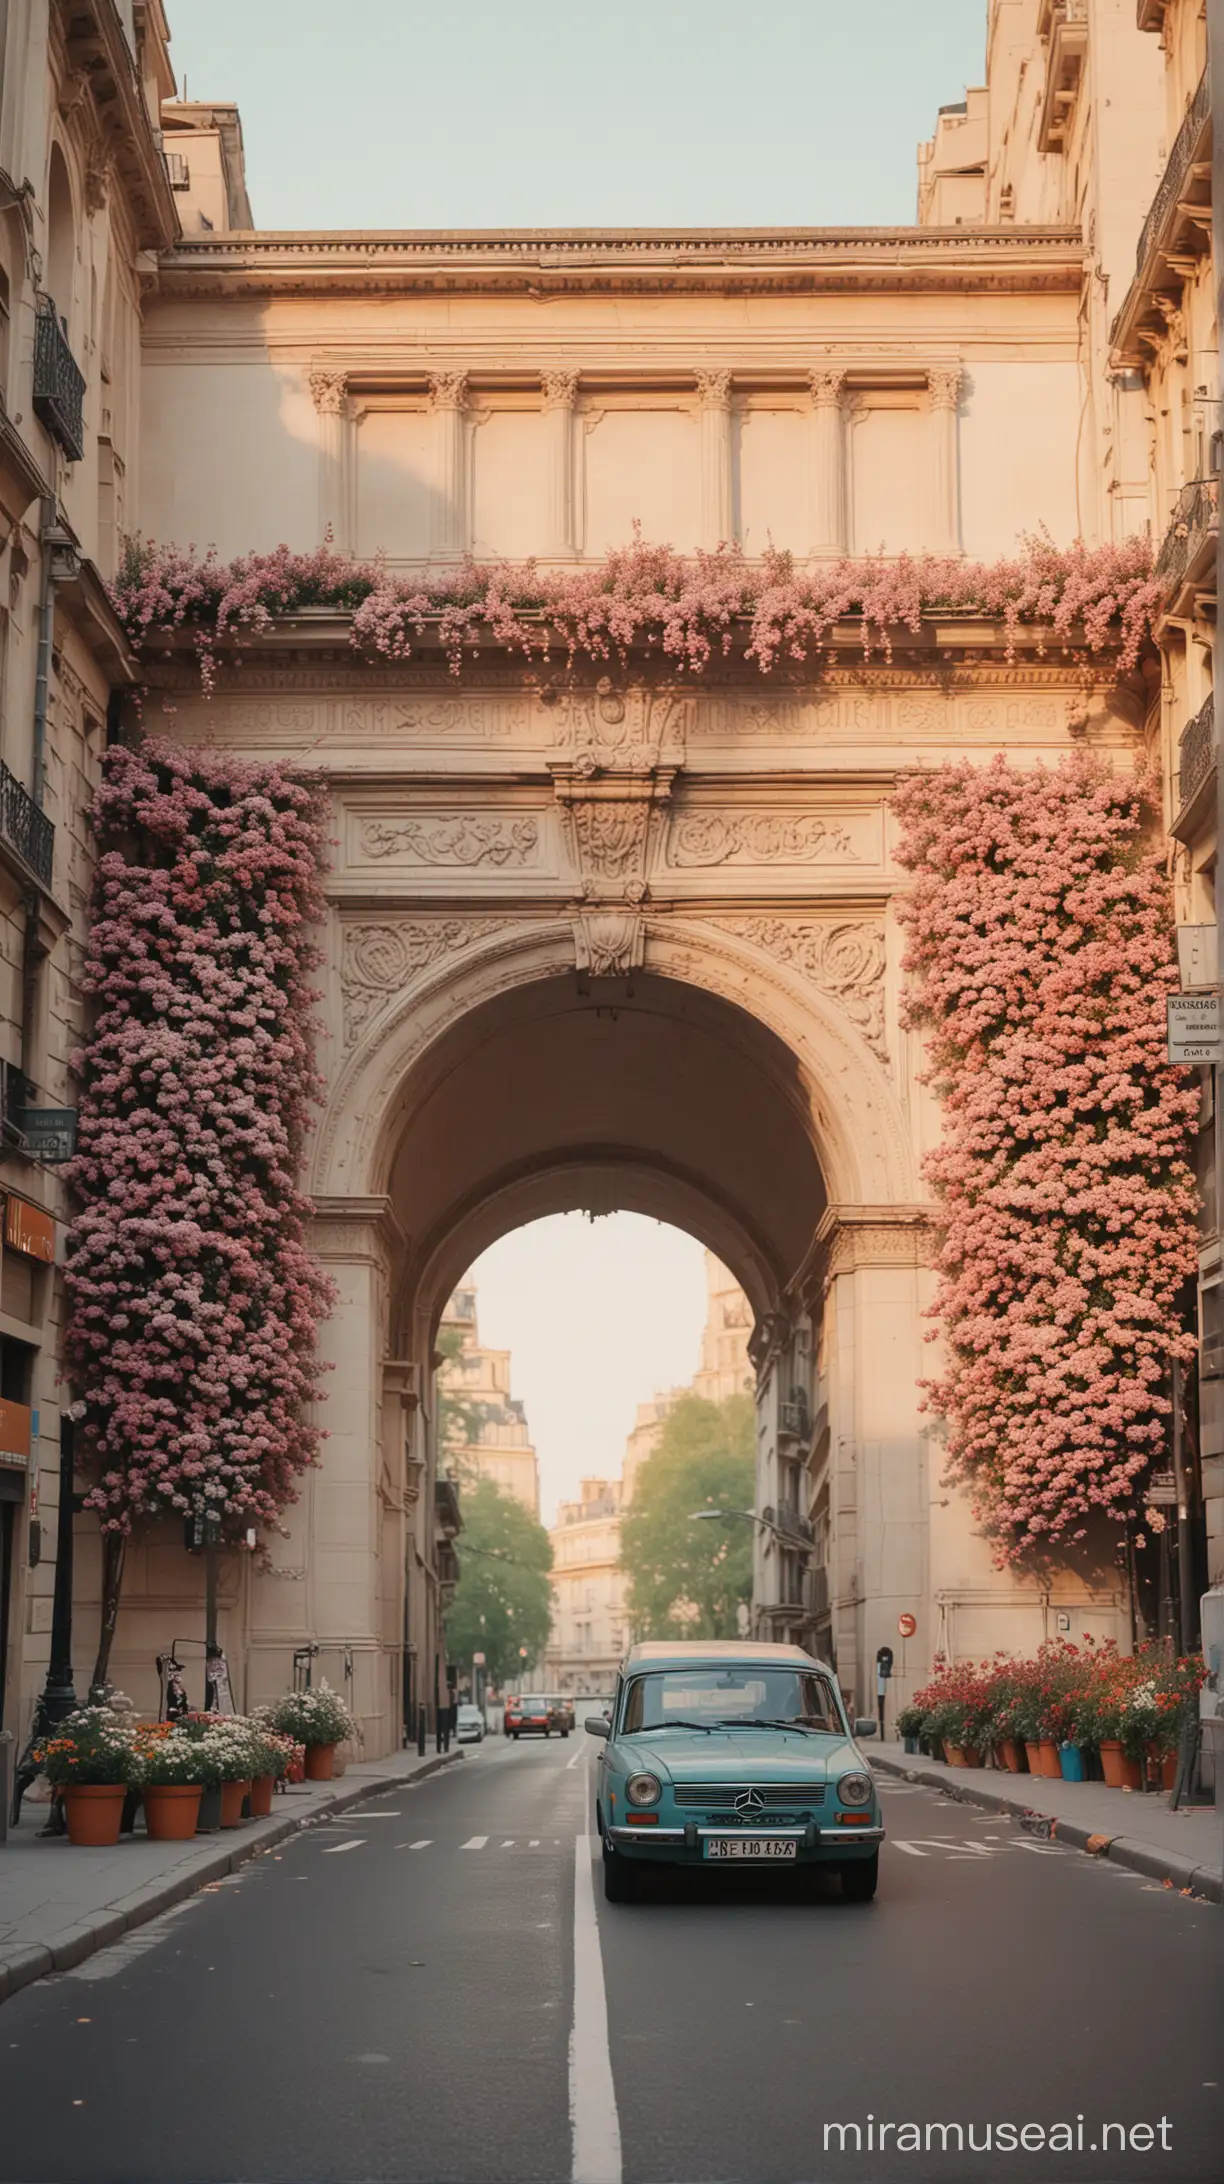 Pastel Triumphal Arch in Paris with Flowery Traffic and People